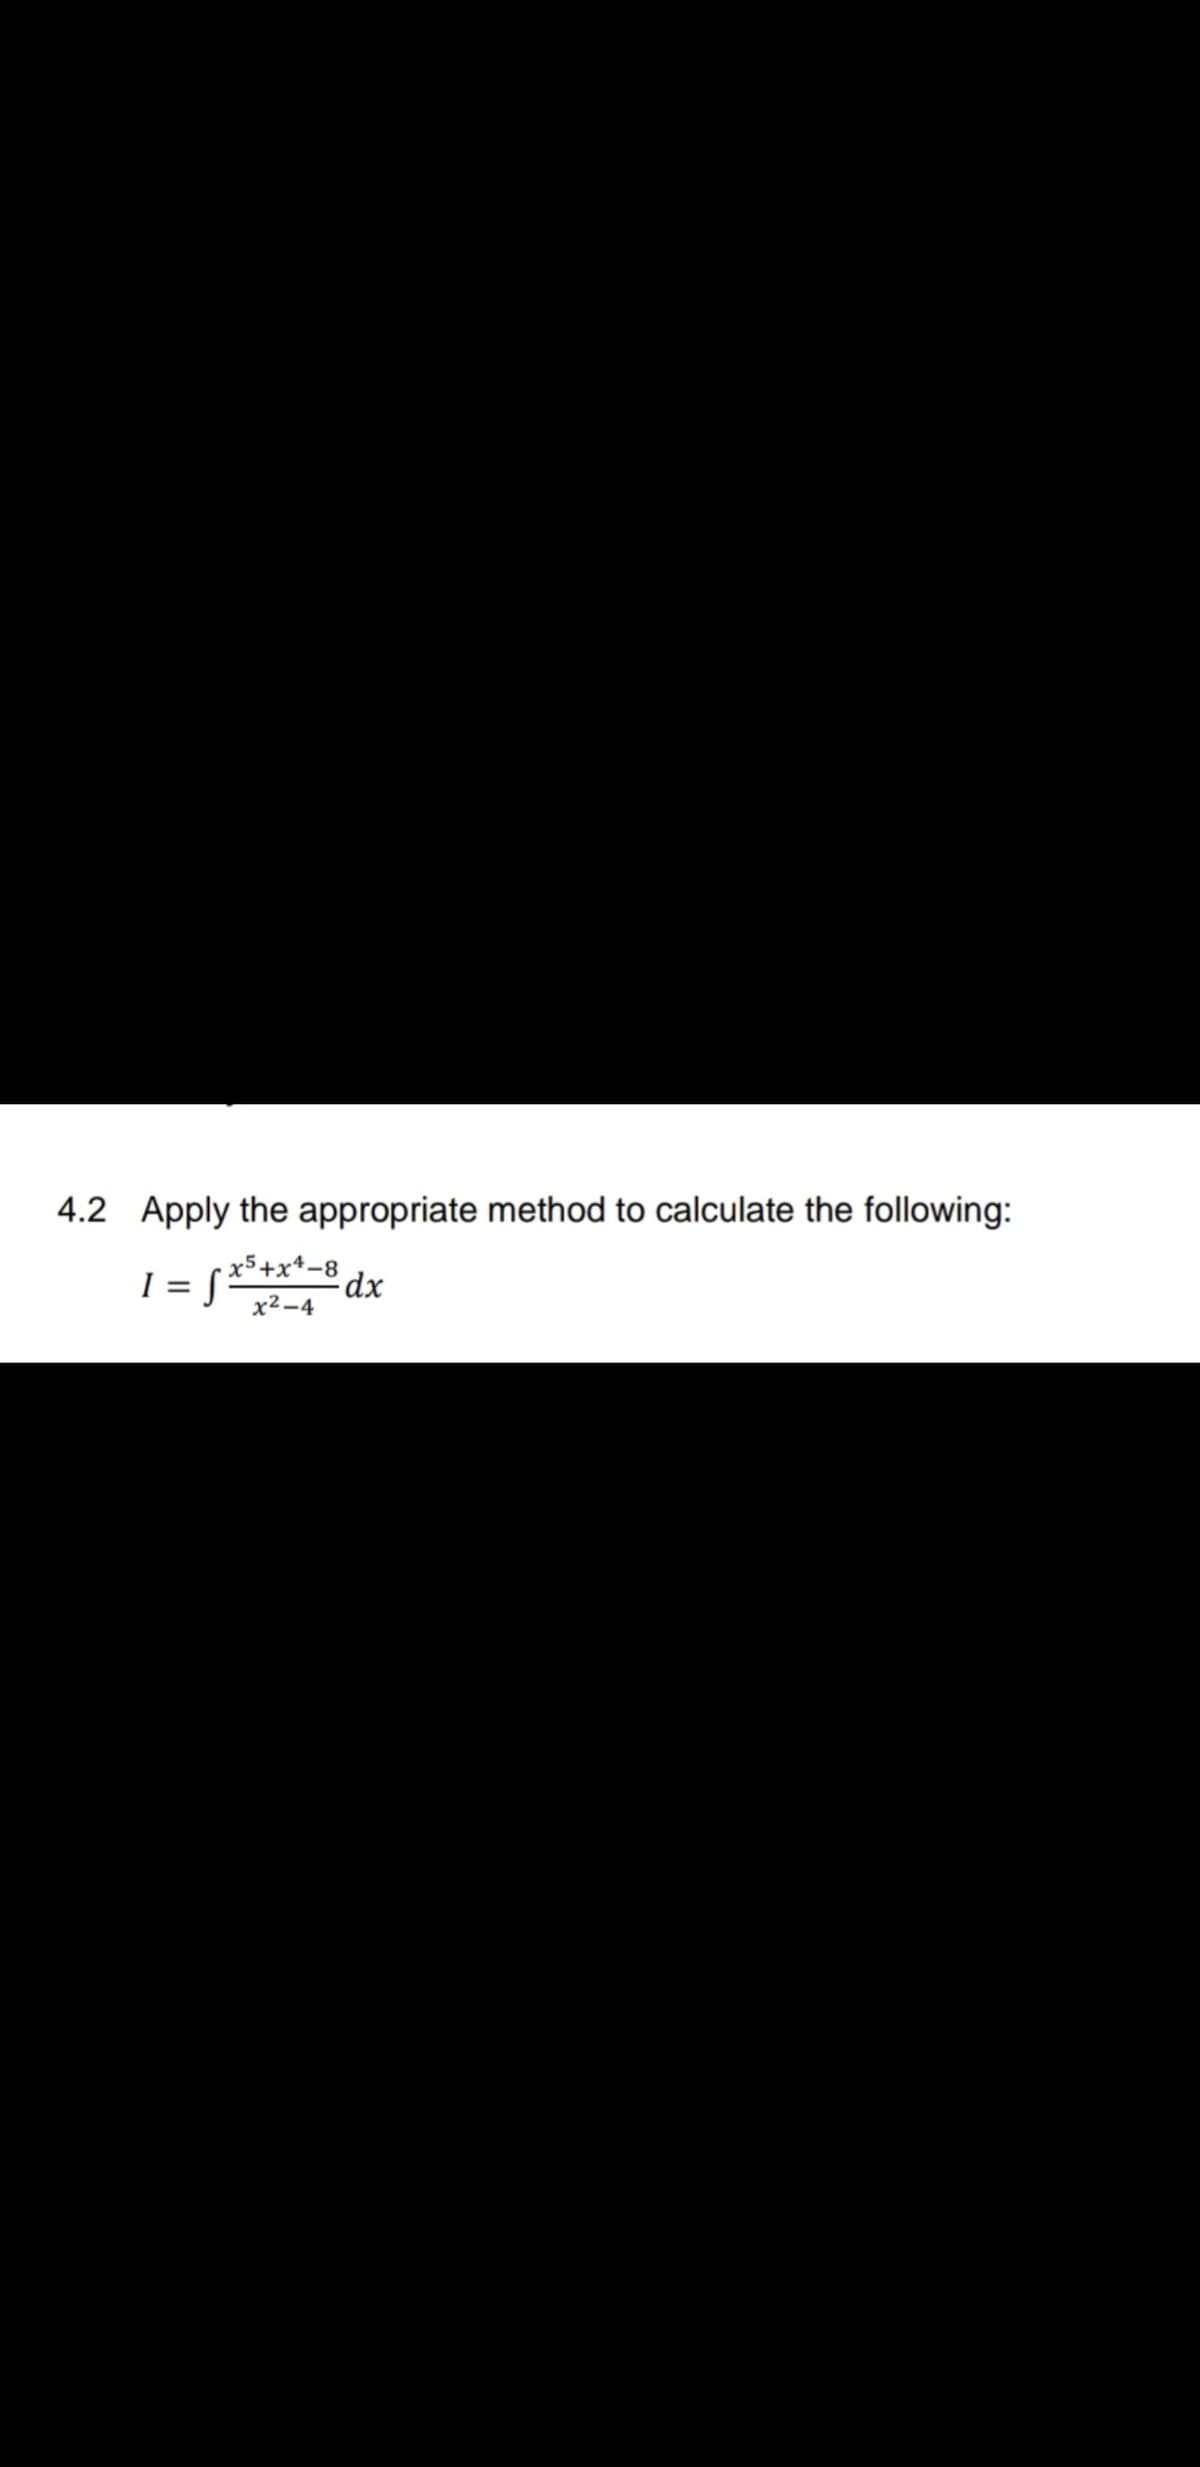 4.2 Apply the appropriate method to calculate the following:
I = f*
x5+x*-8
dx
x² -4
